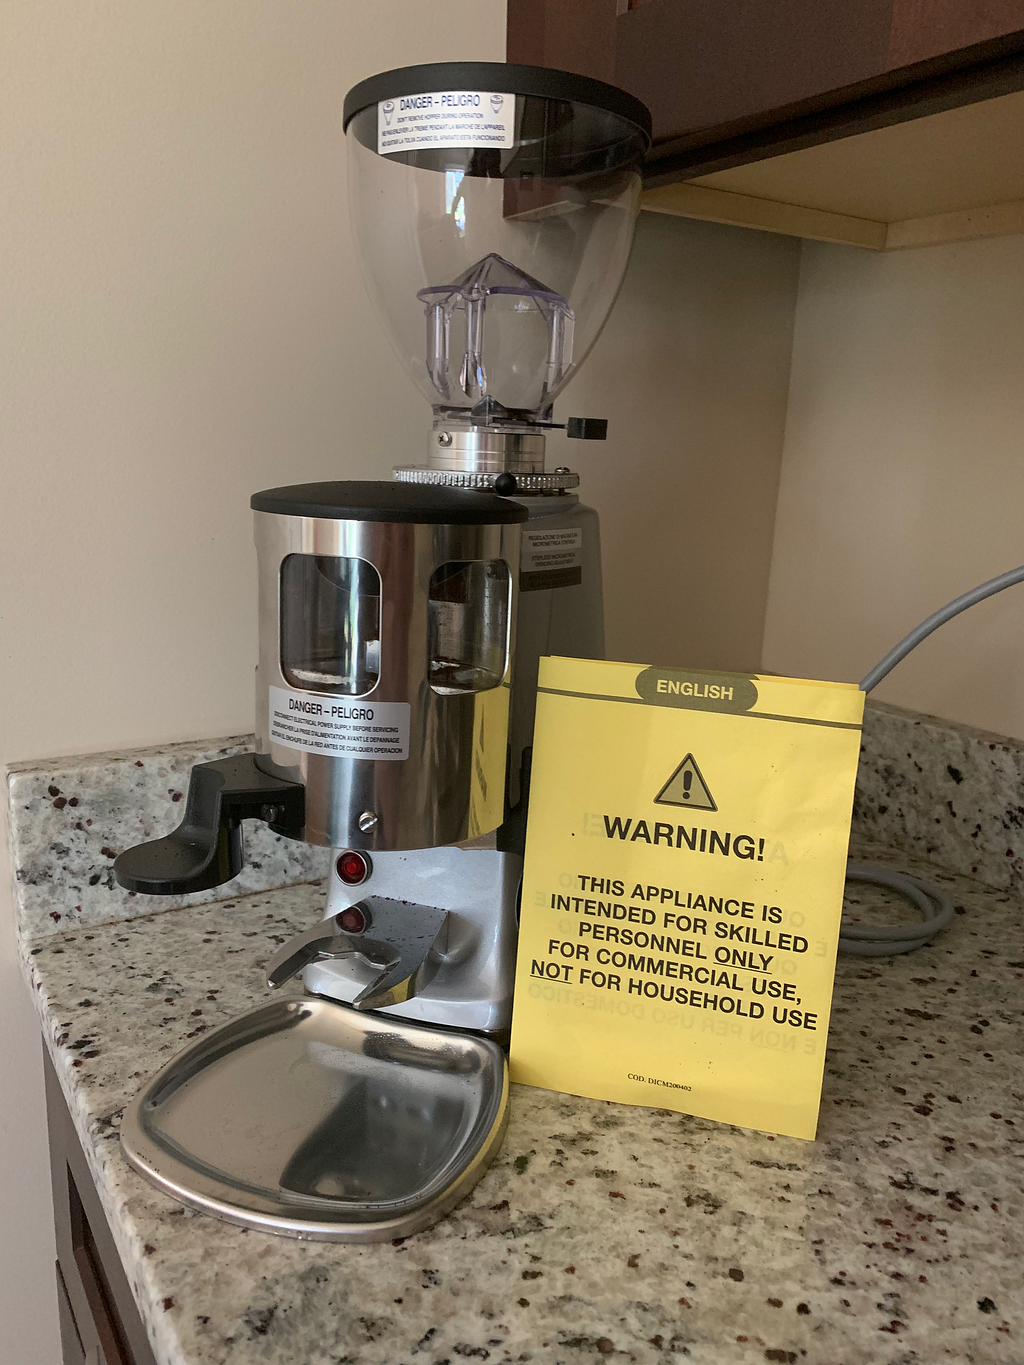 A coffee grinder with a yellow piece of paper next to it that says warning in large text.